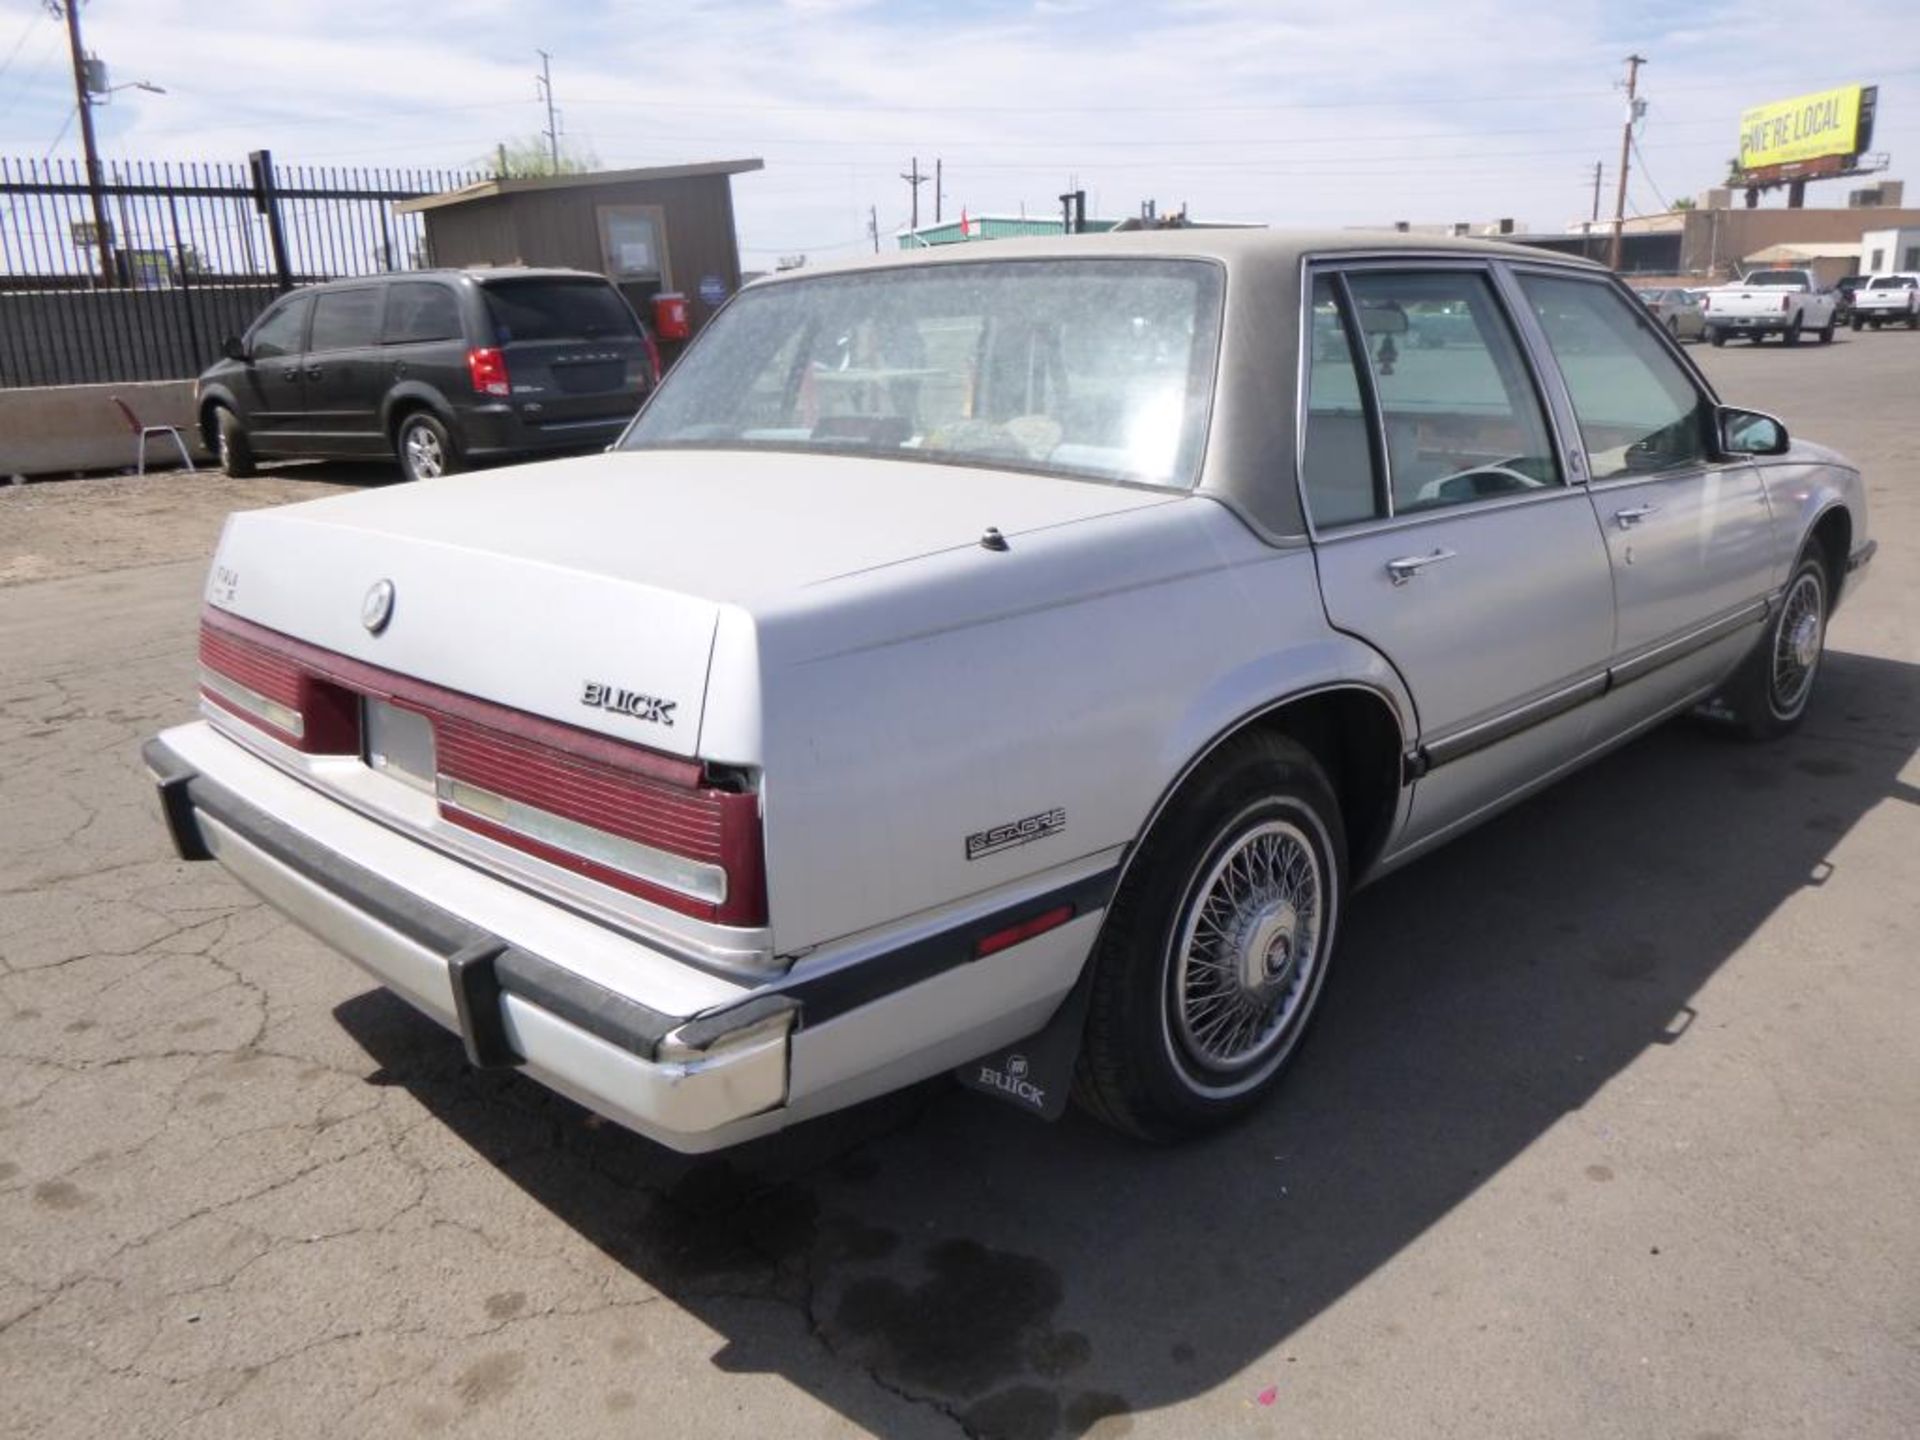 1990 Buick LeSabre - Image 3 of 15